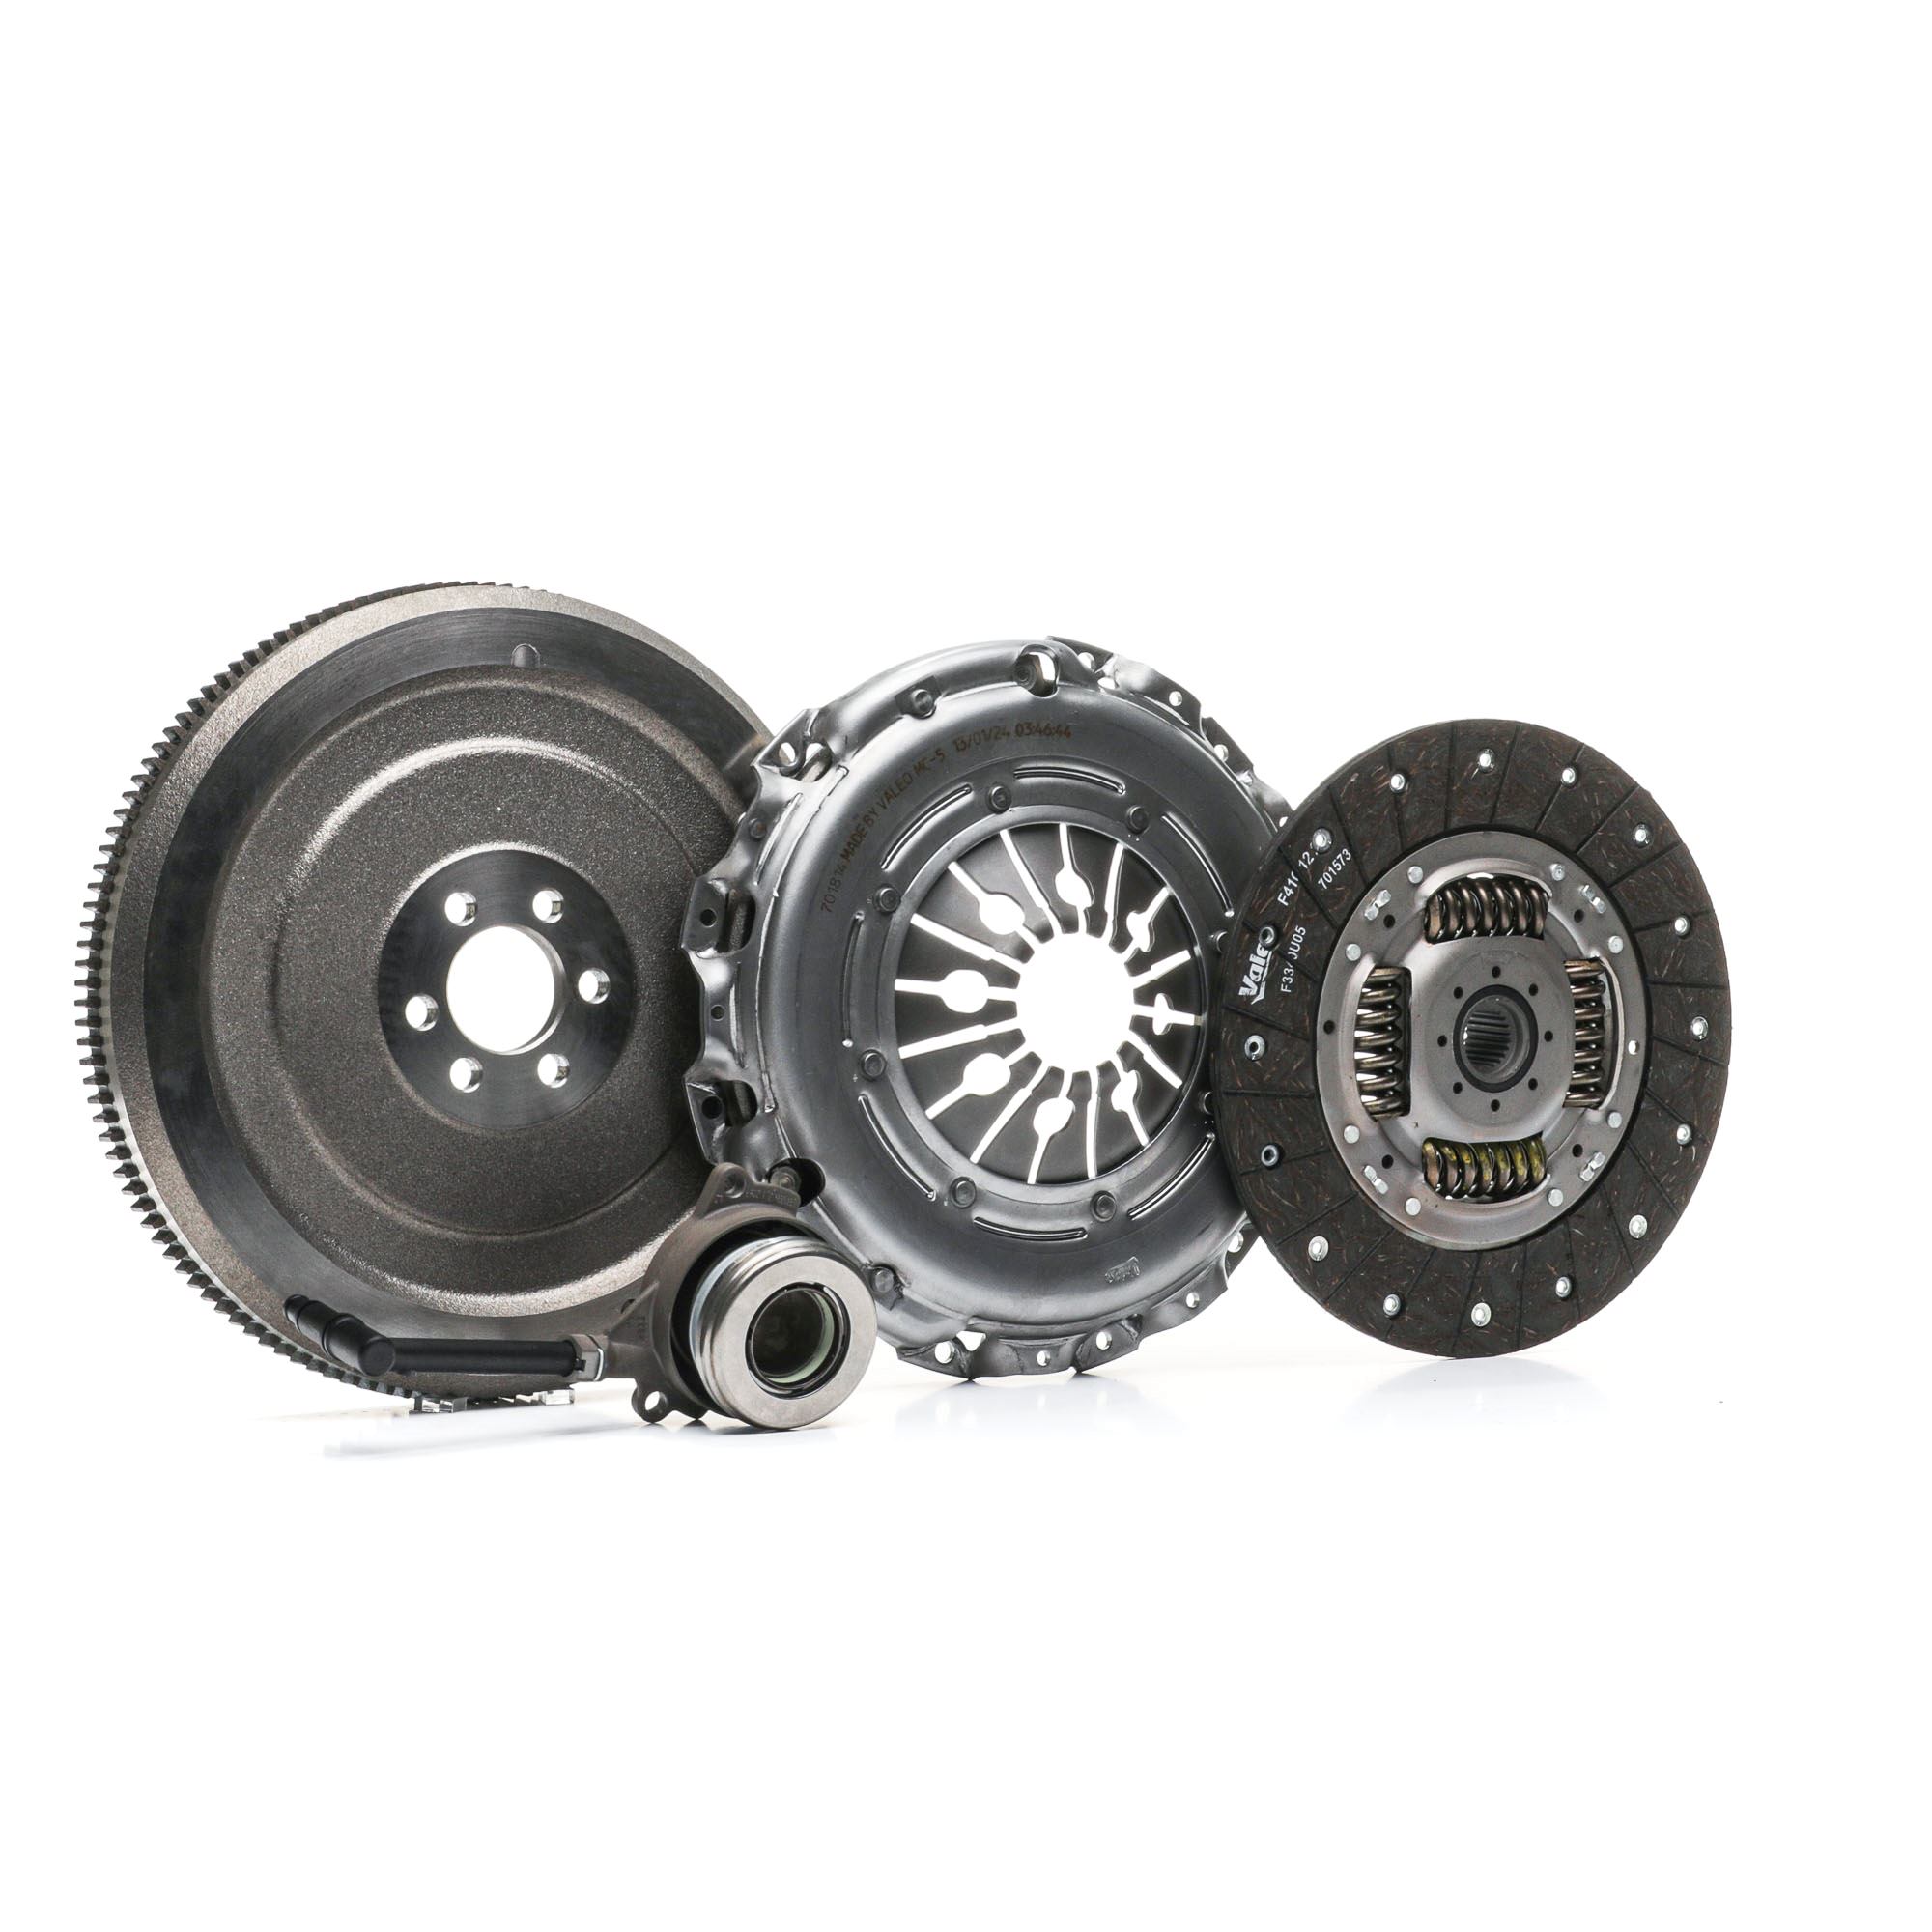 VALEO FULLPACK DMF (CSC) 837411 Clutch kit with dual-mass flywheel, with central slave cylinder